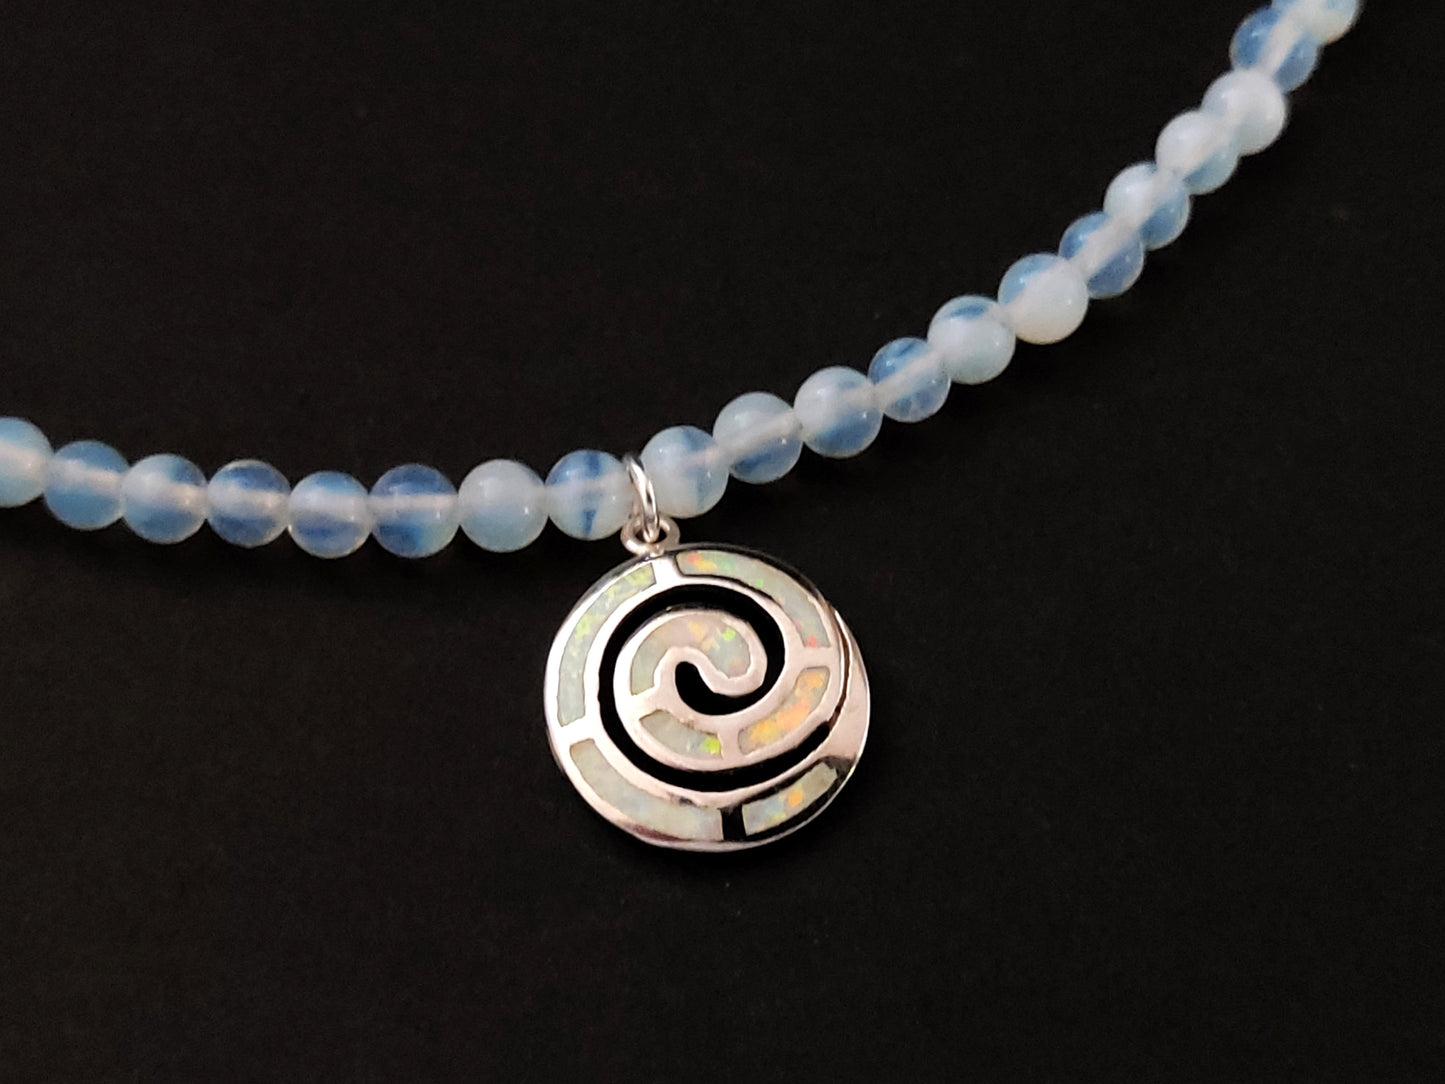 Greek necklace made of silver white opal spiral pendant and moonstone beads of 4mm.